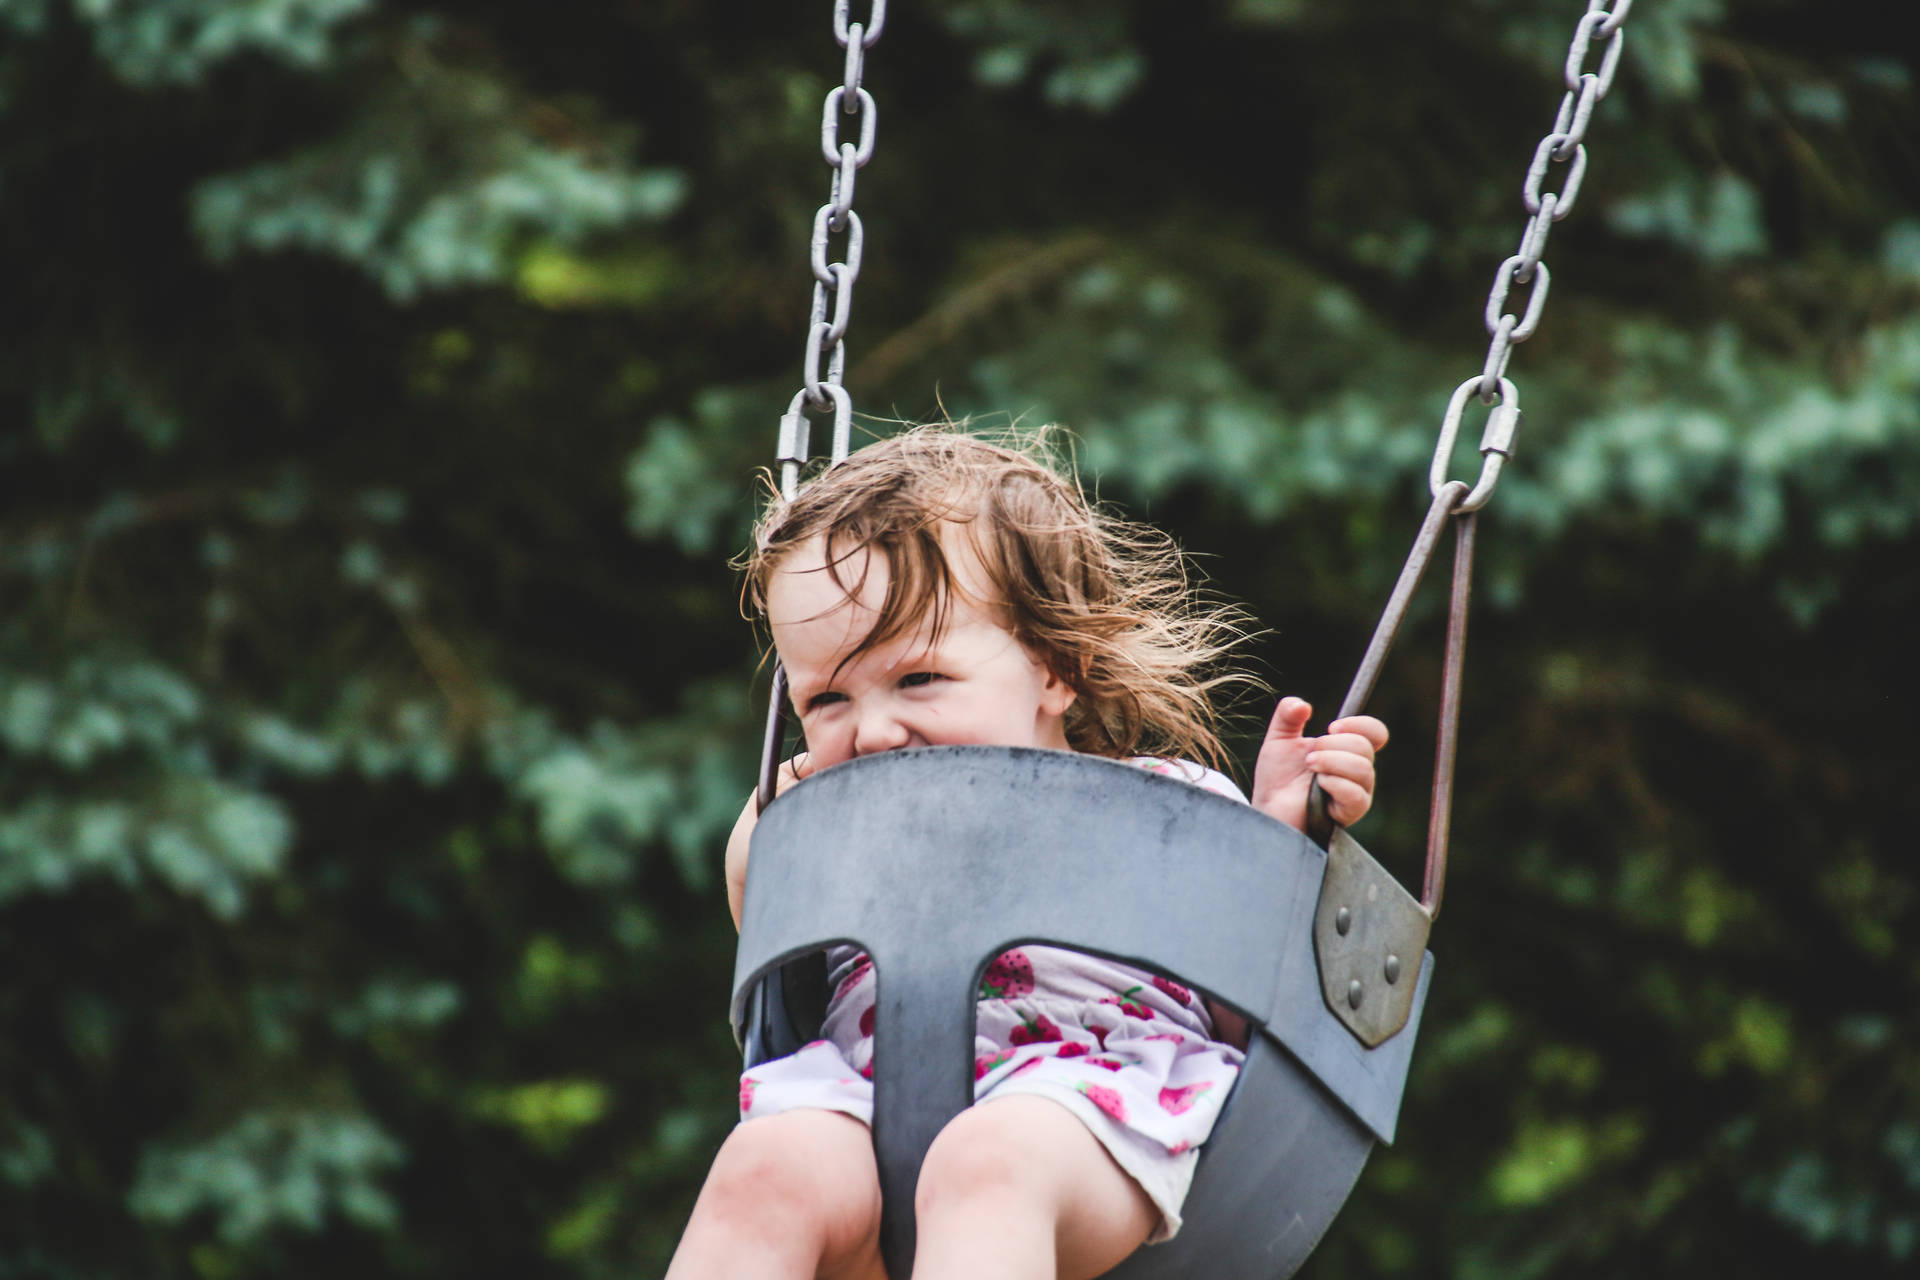 Young Girl On Playground Swing